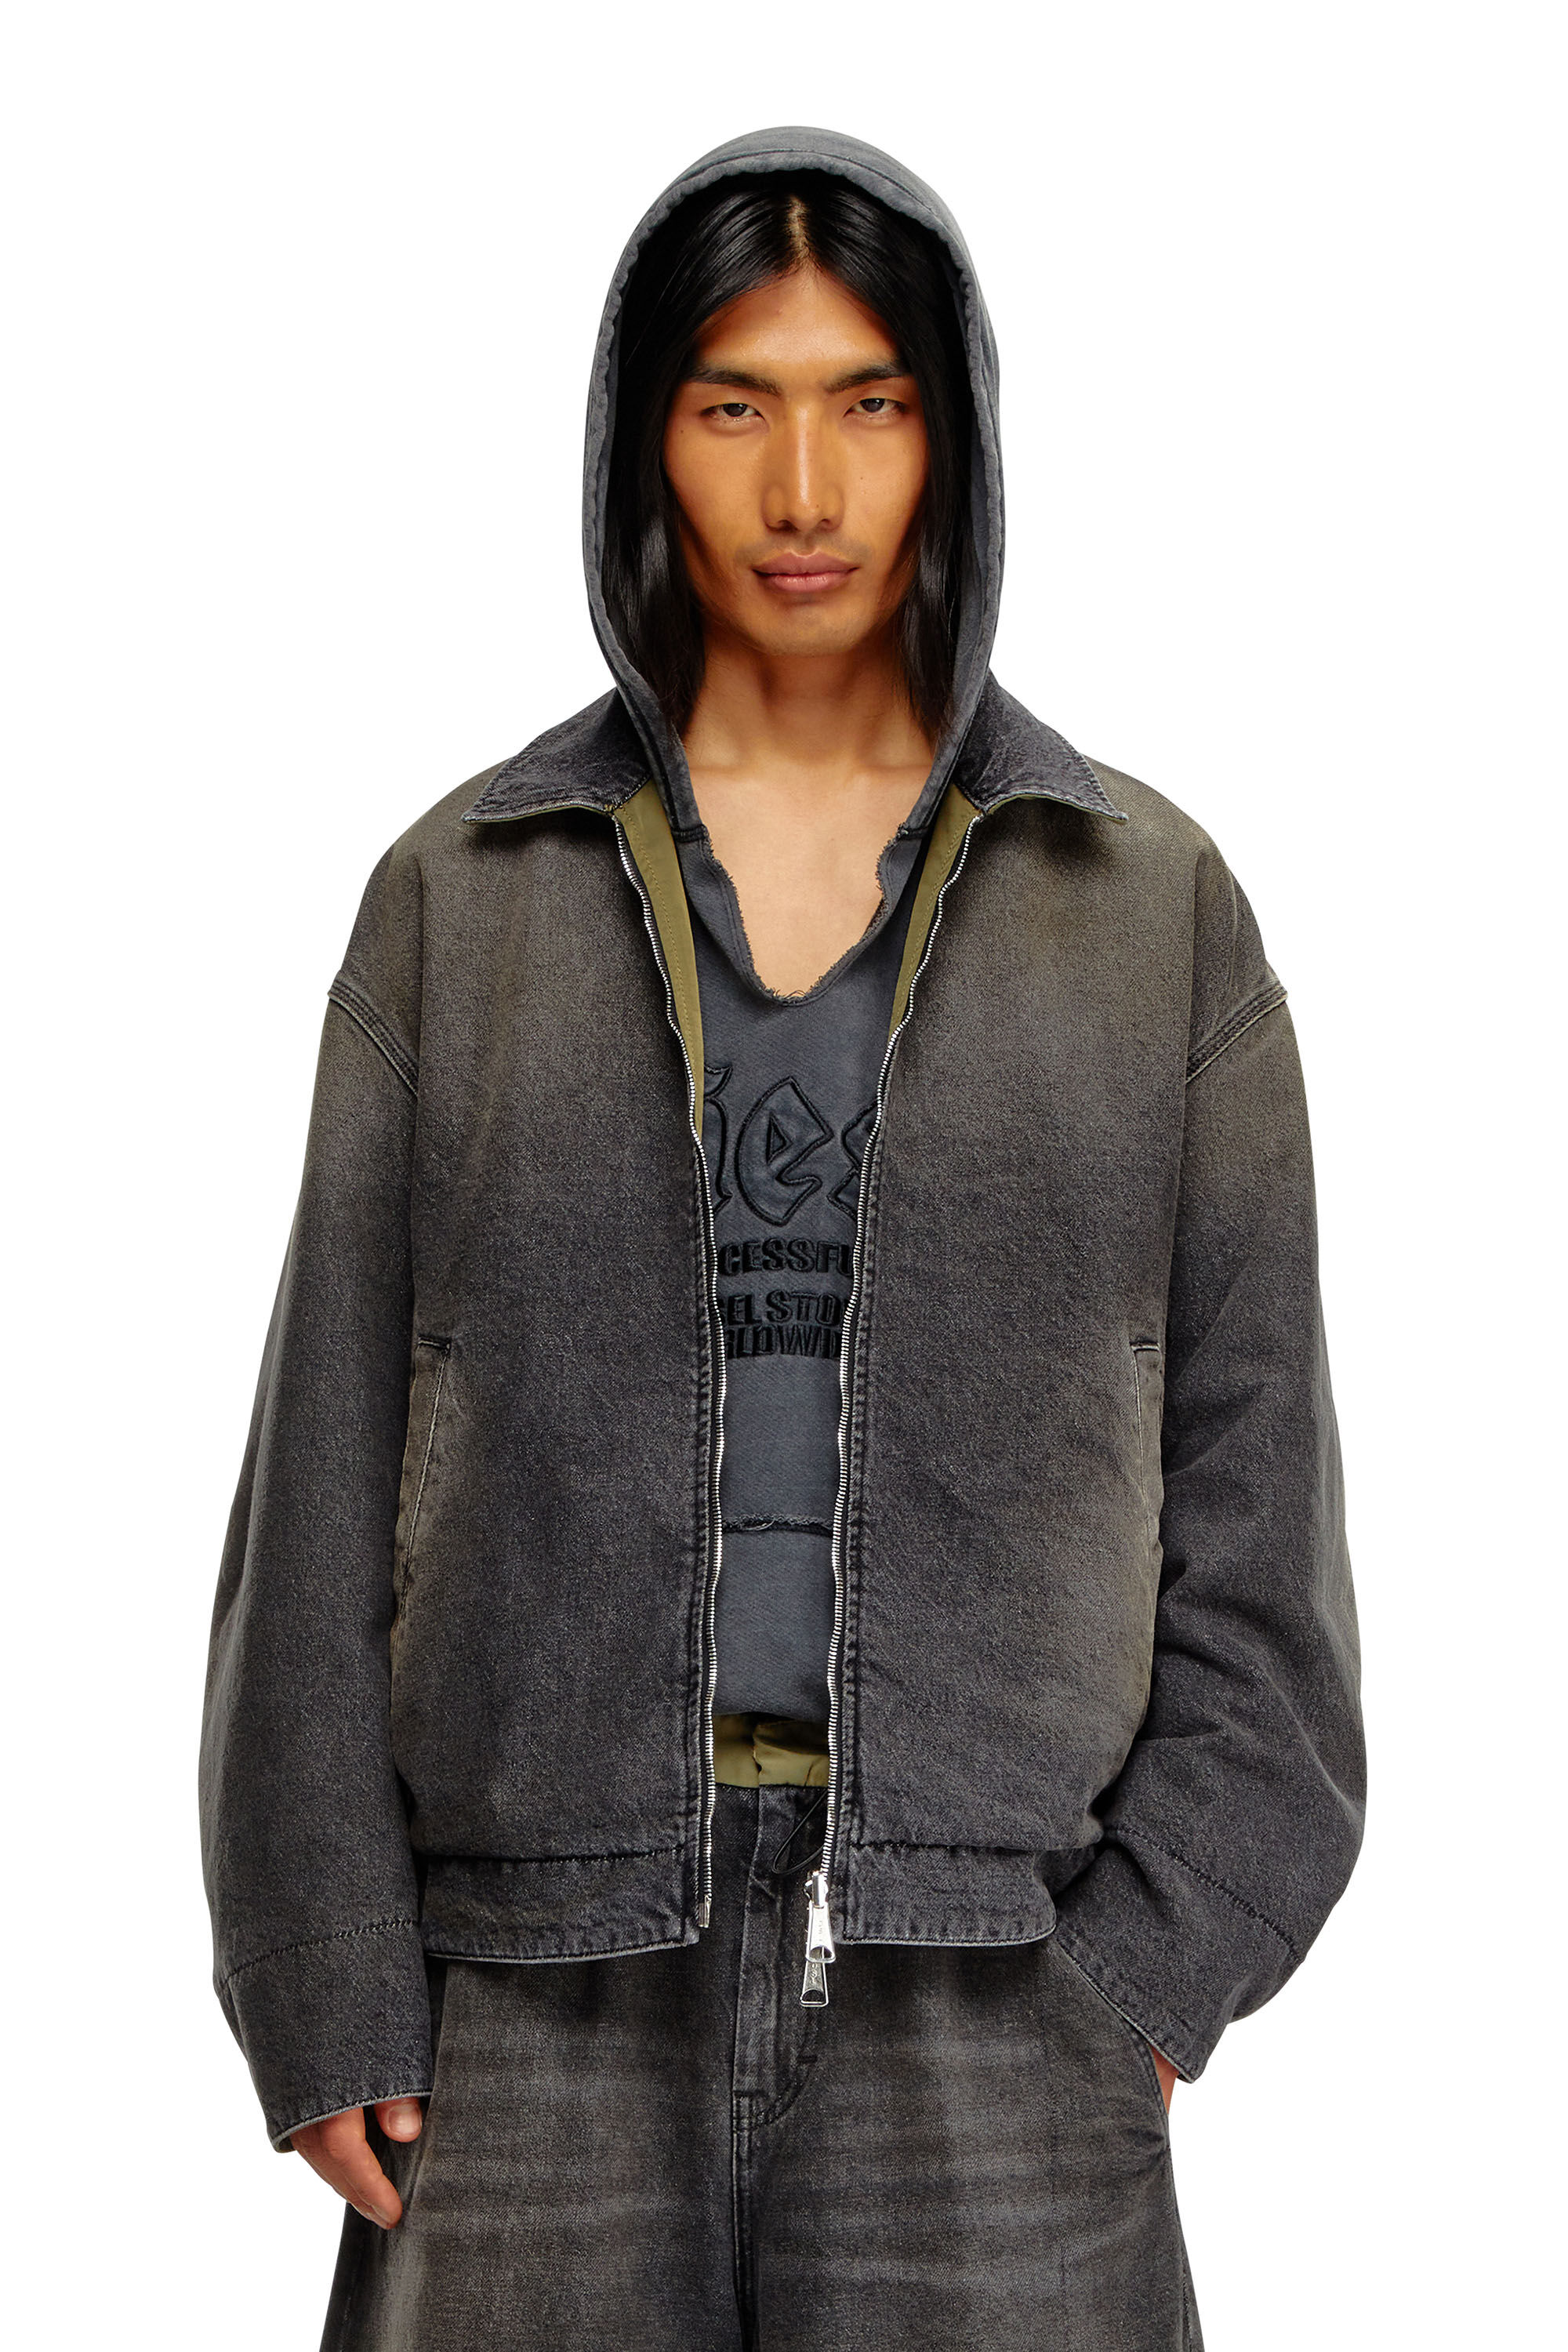 Diesel - D-STACK-S, Male Reversible jacket in denim and nylon in ブラック - Image 3